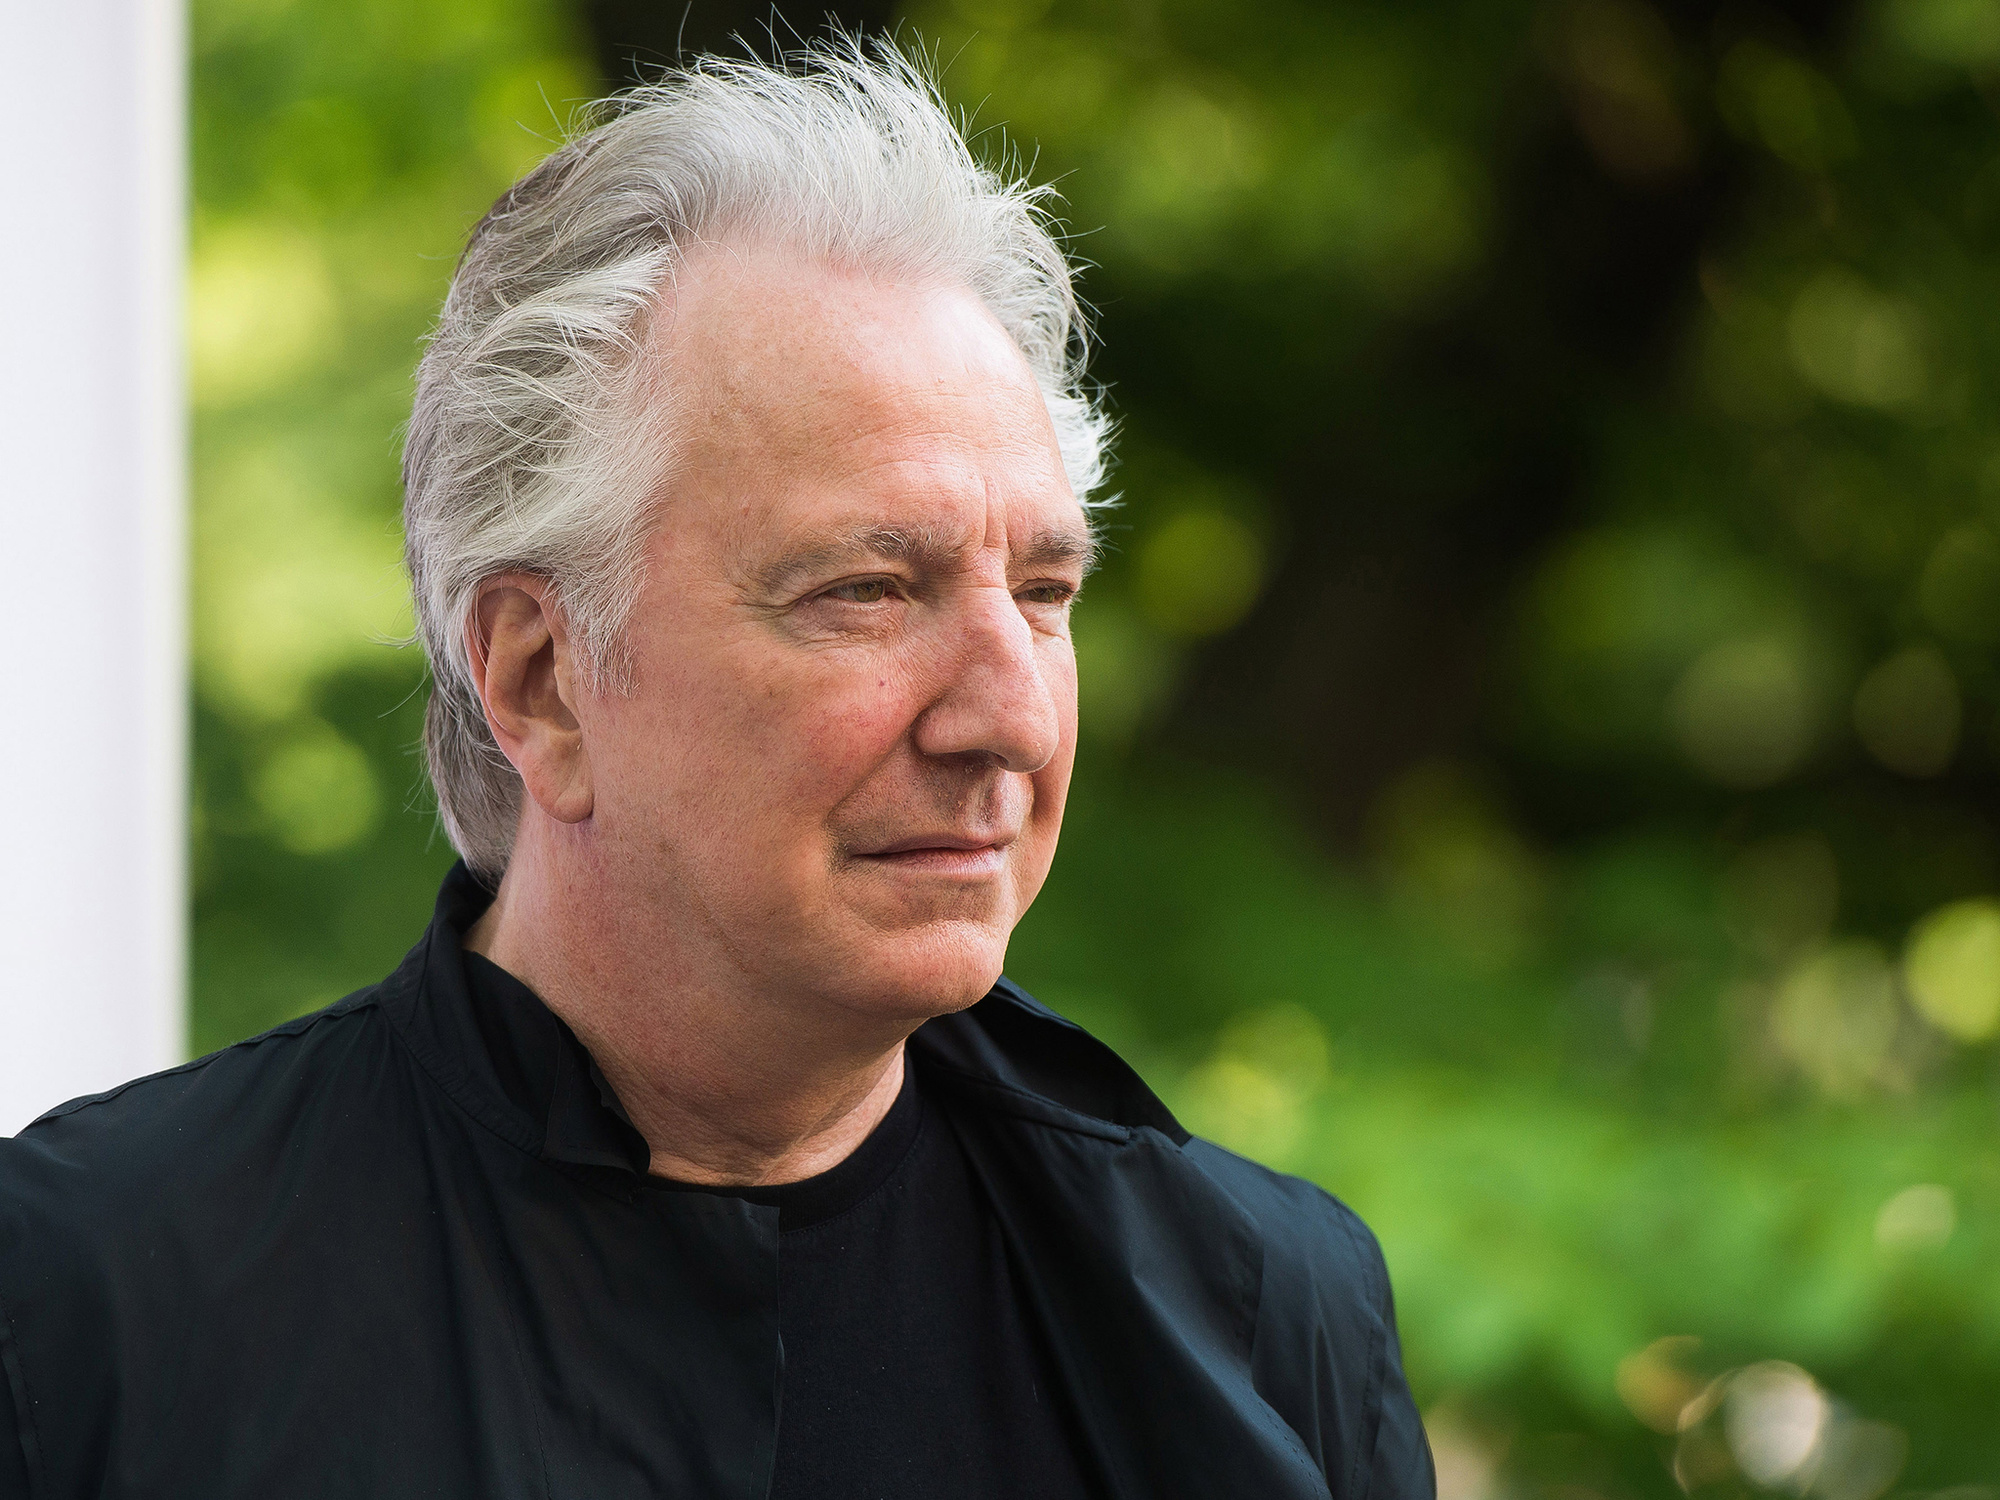 Alan Rickman.
British actor Rickman played roles in Die Hard and Robin Hood, but you might know him best as Severus Snape from Harry Potter. This is a calm photo of him before he died of cancer at the age of 69.